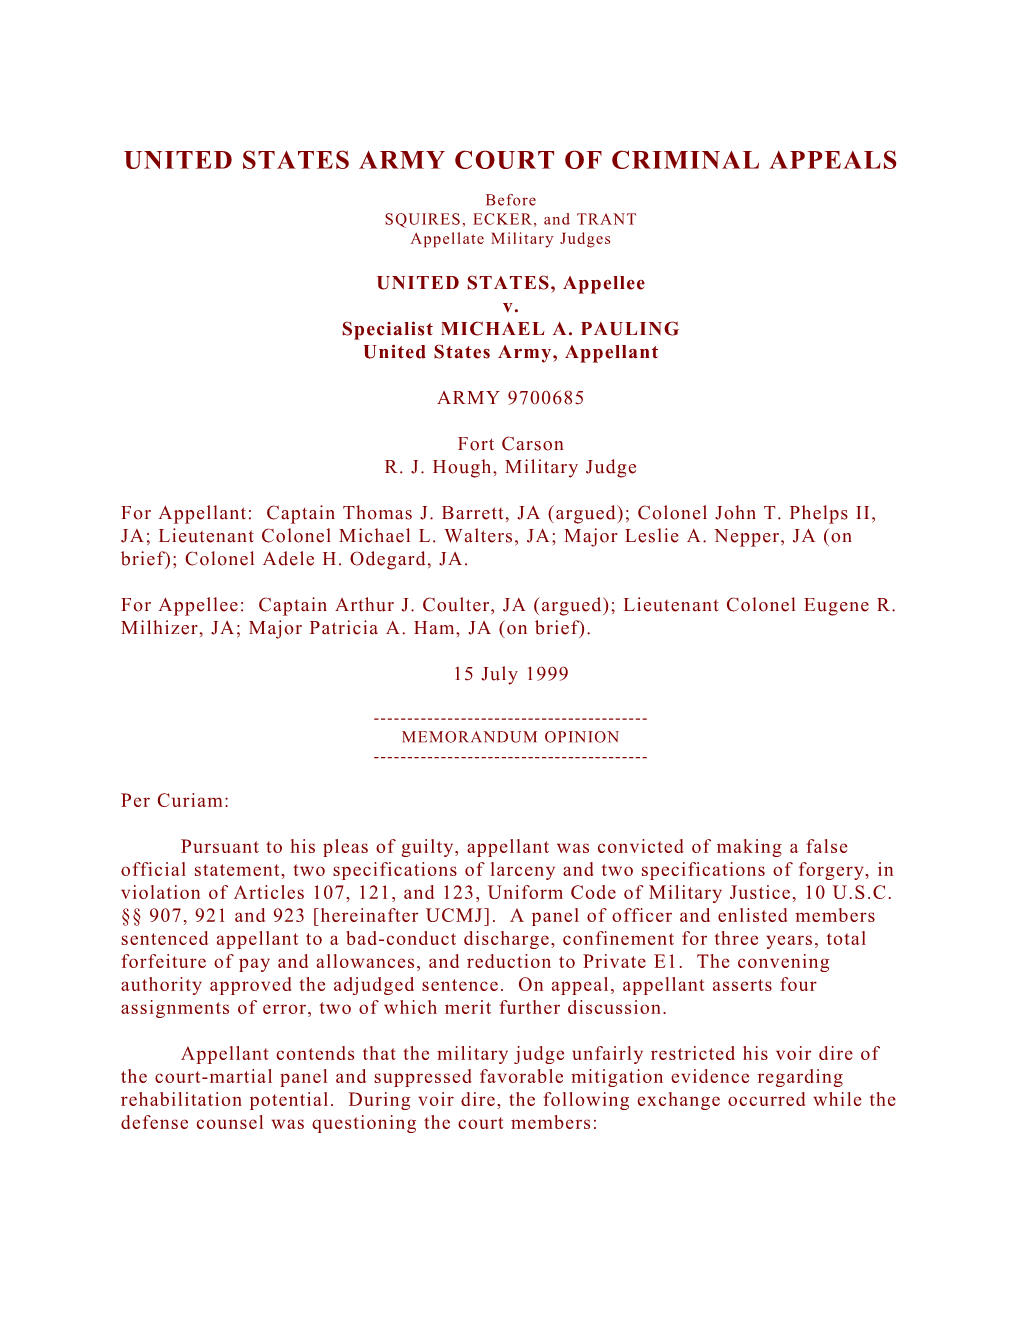 United States Army Court of Criminal Appeals s8